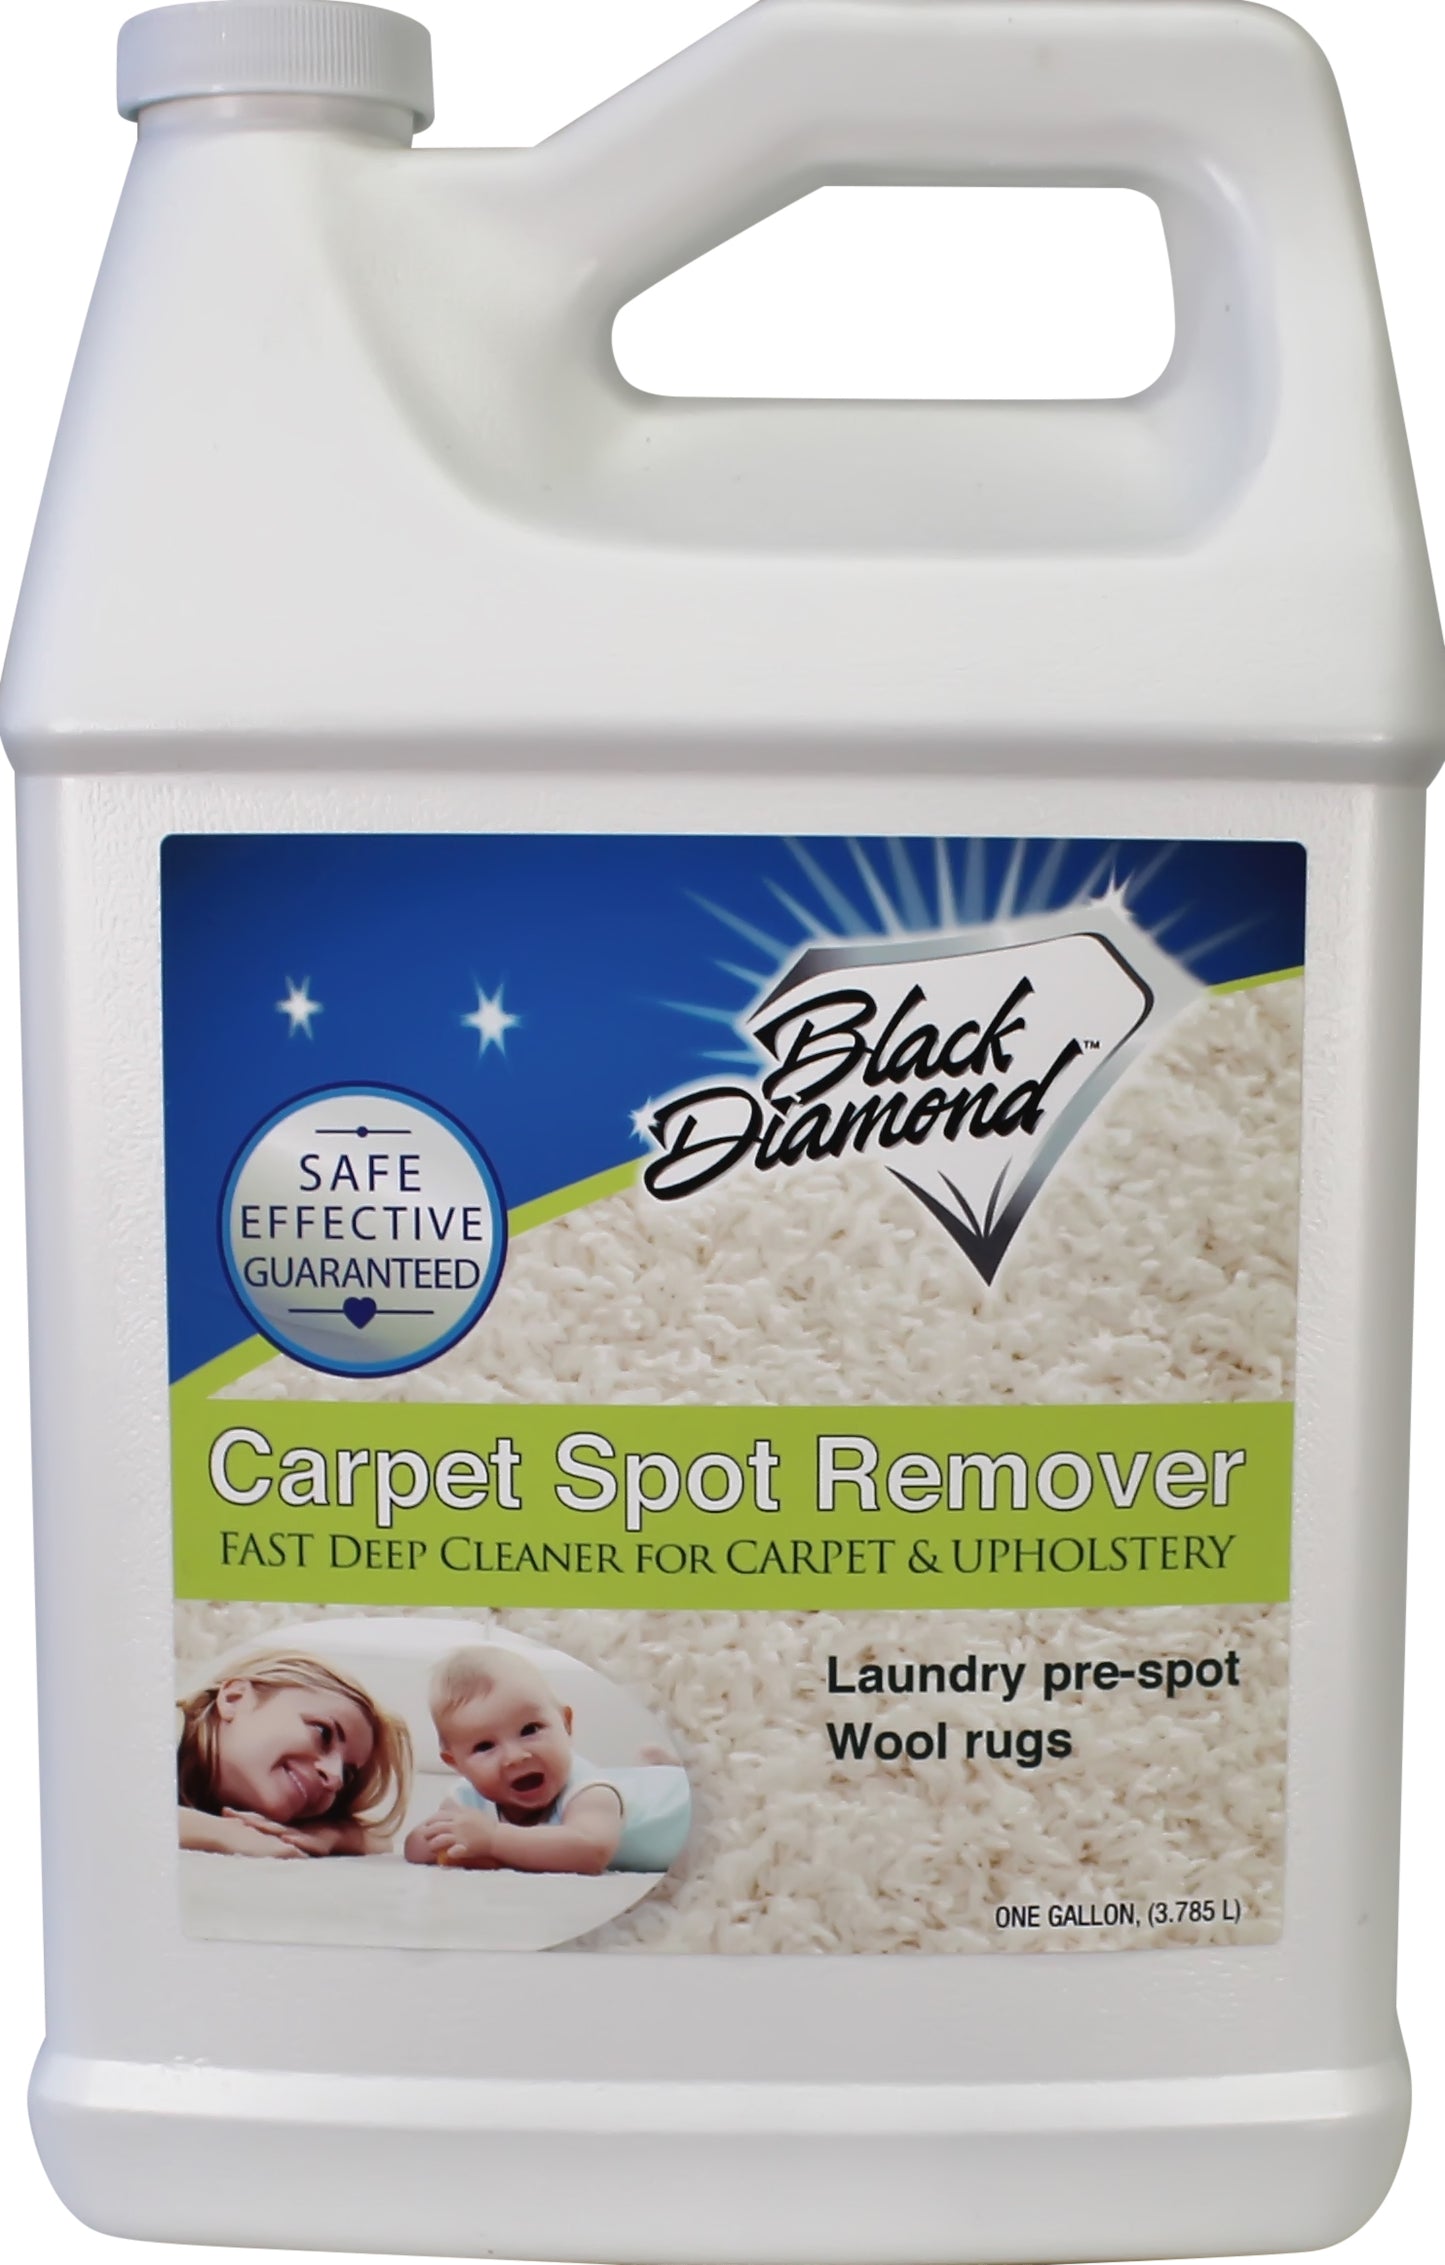 Black Diamond Stoneworks Carpet & Upholstery Cleaner: This Fast Acting Deep Cleaning Spot & Stain Remover Spray Also Works Great on Rugs, Couches and Car Seats.